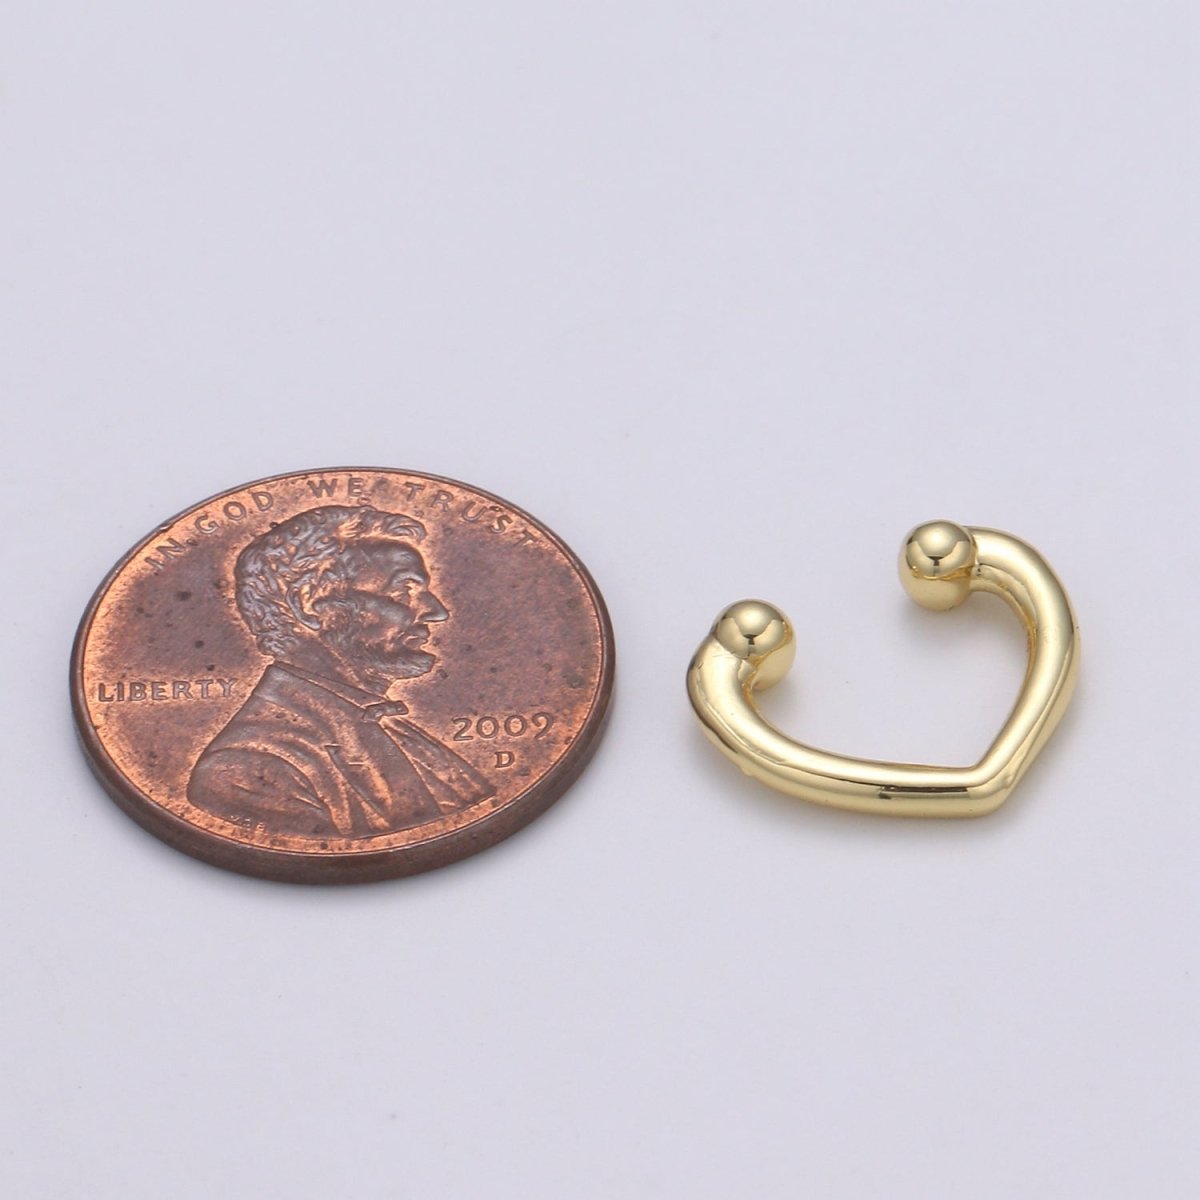 Dainty Gold Filled Simple Earcuffs - AI-085 - DLUXCA